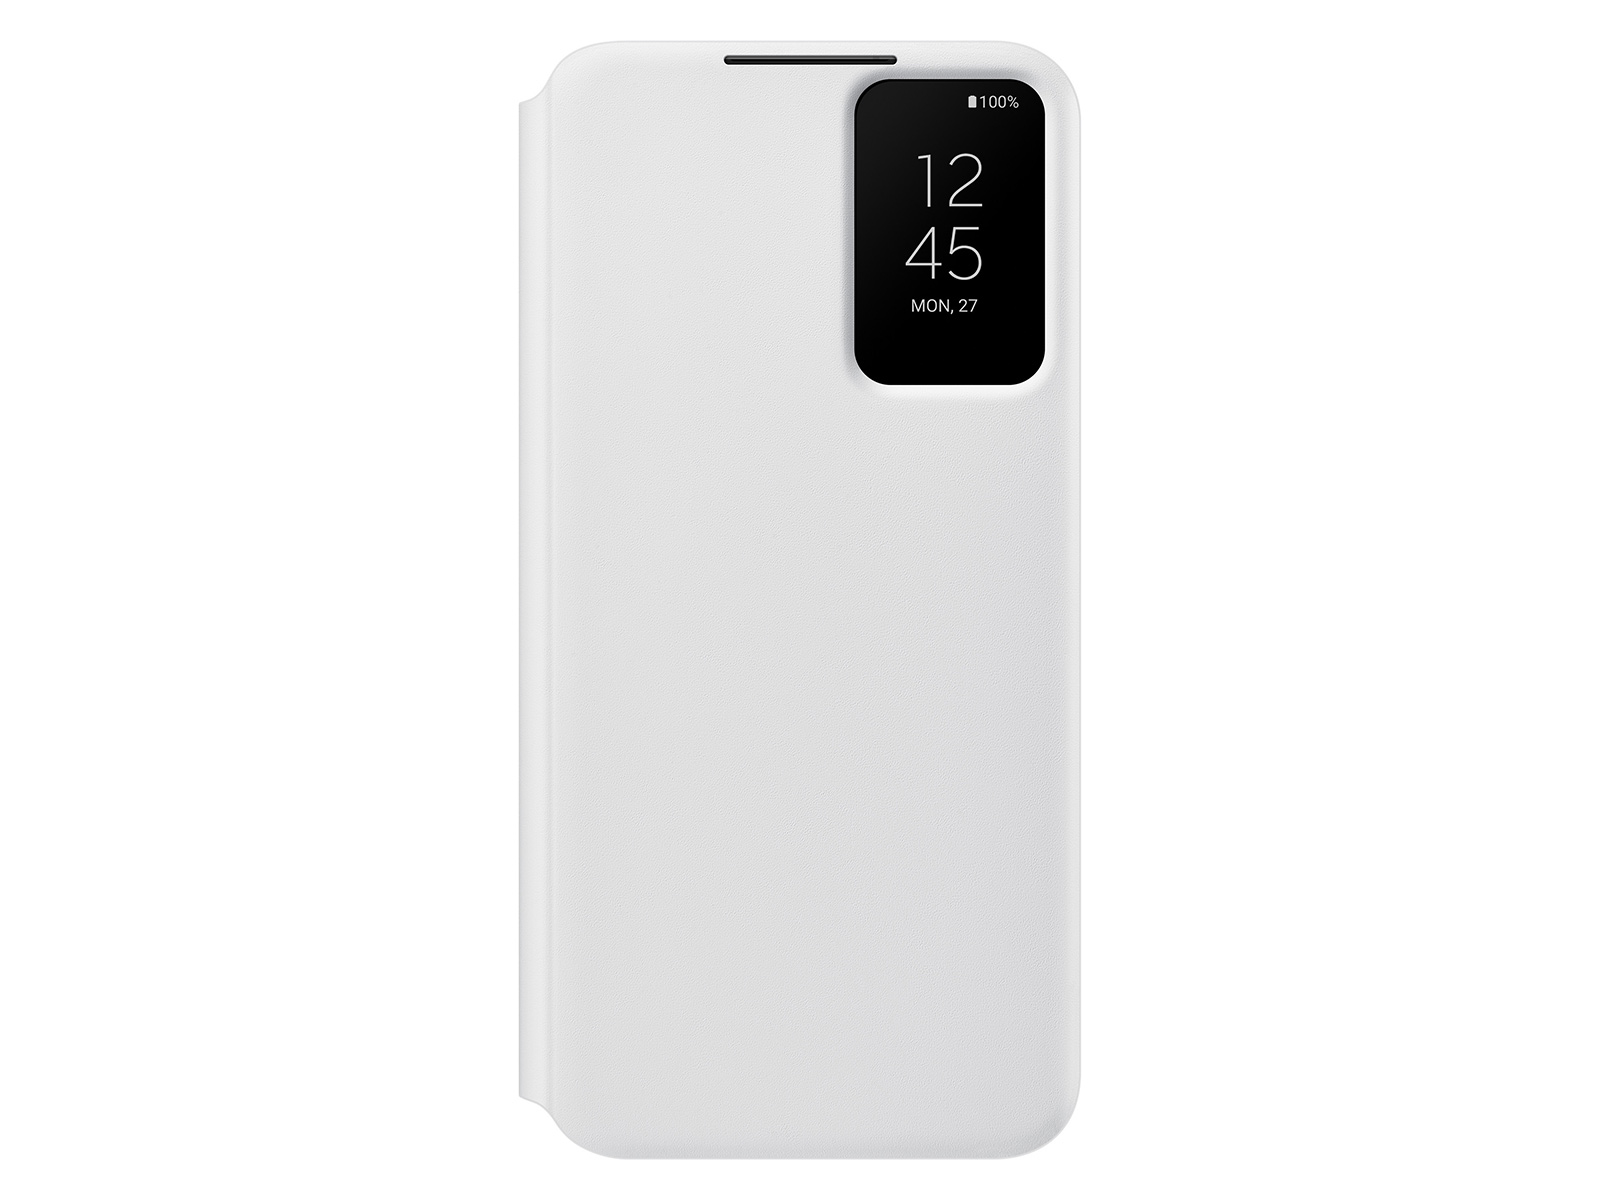 Uitstralen breedte aan de andere kant, Galaxy S22+ S-View Flip Cover, White Mobile Accessories - EF-ZS906CWEGUS |  Samsung US